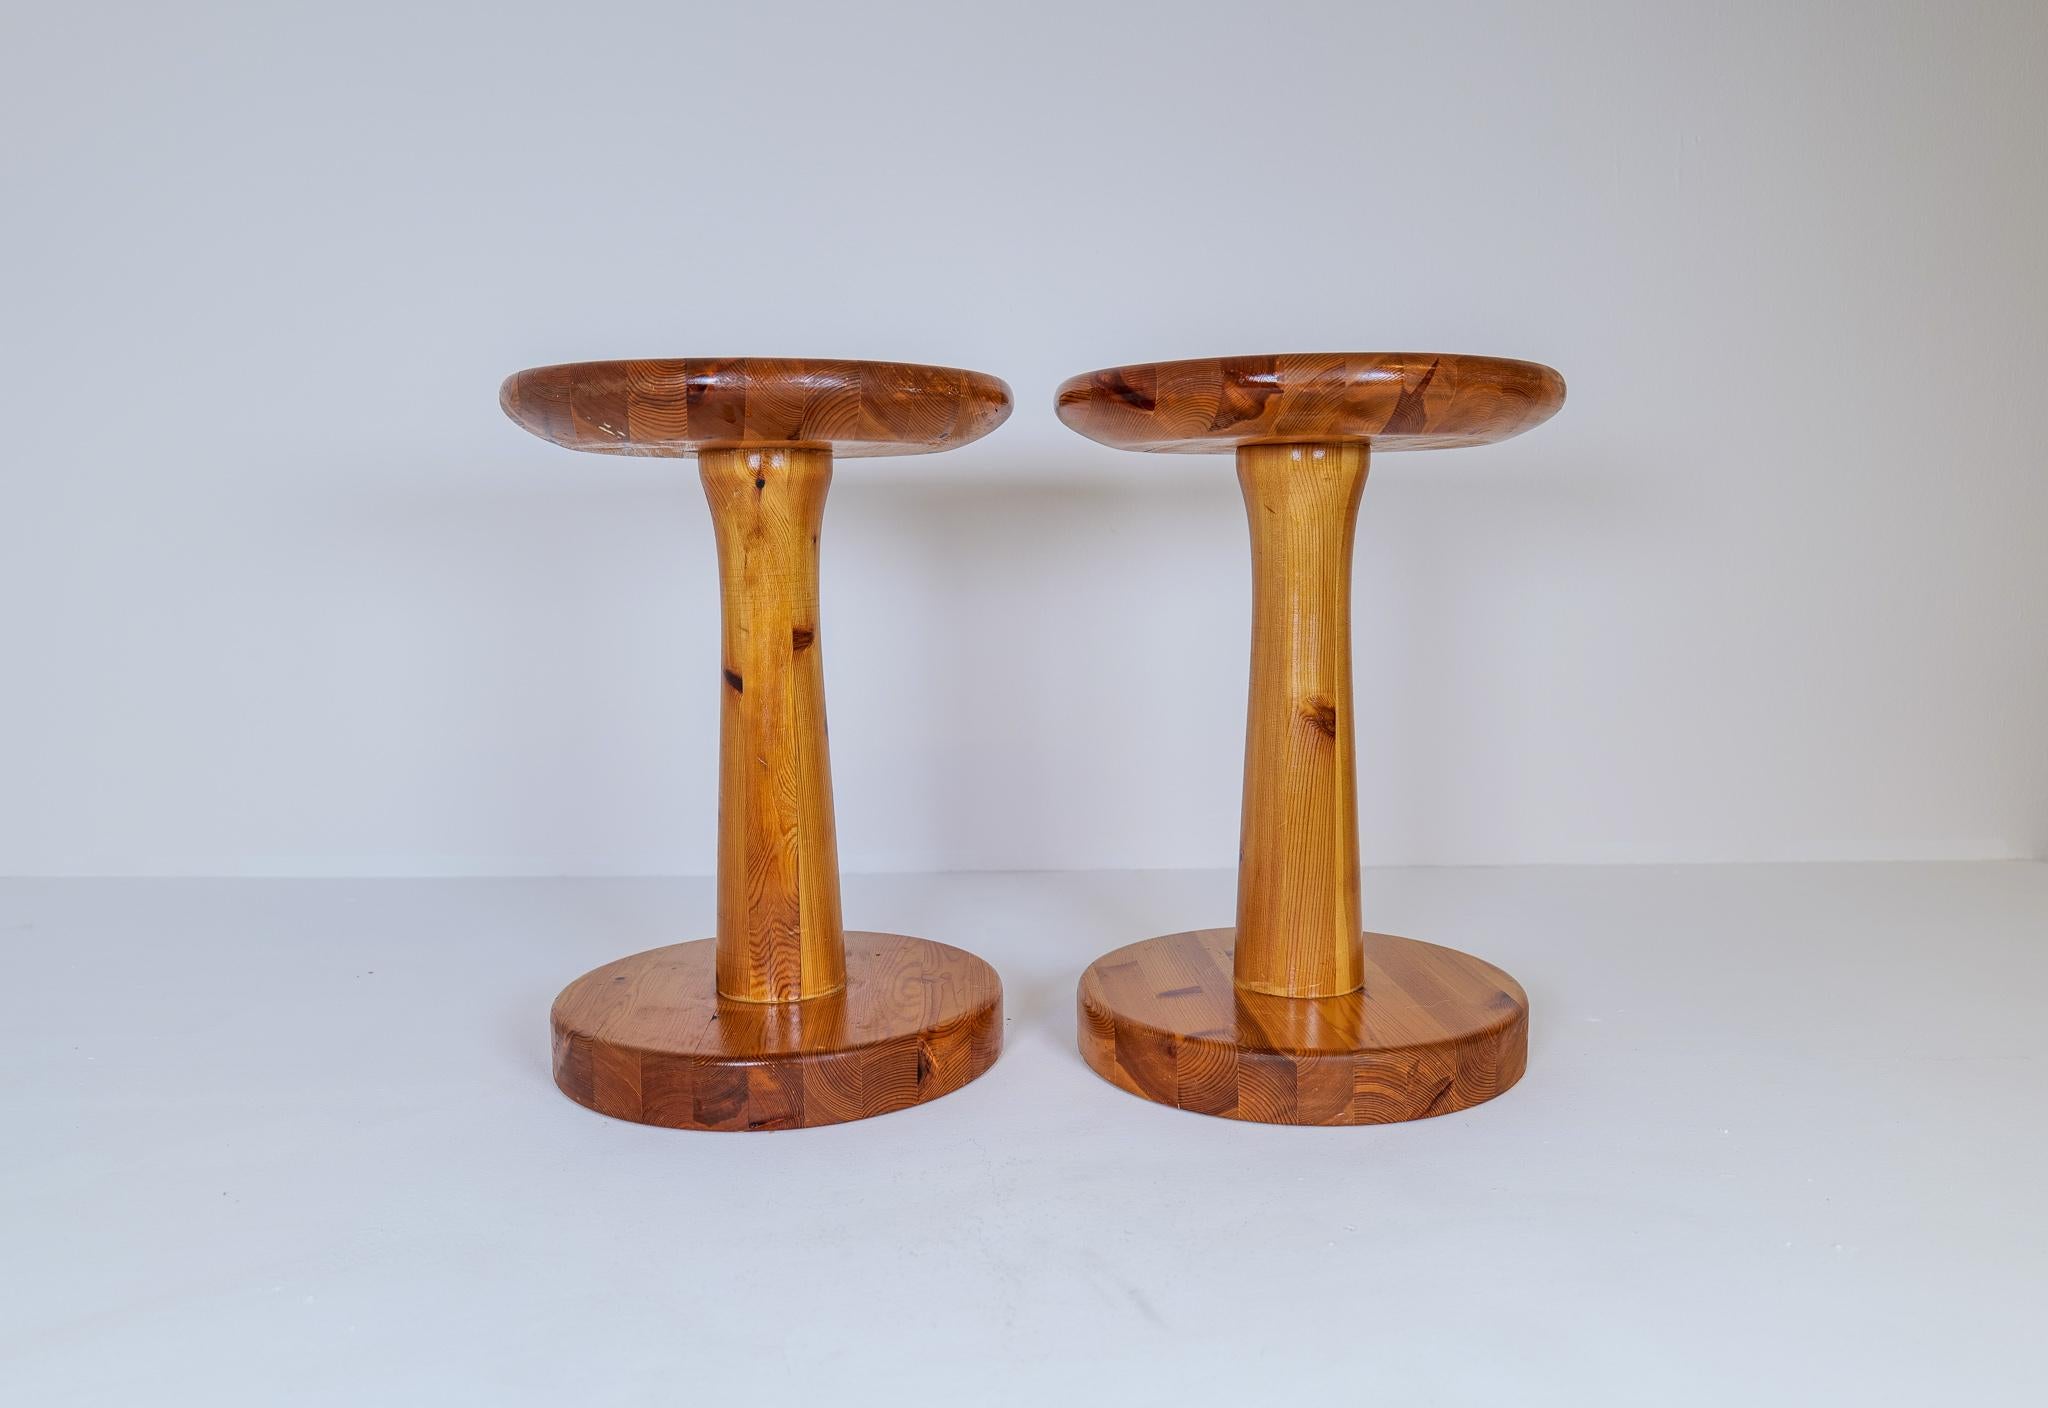 Late 20th Century Scandinavian Modern Minimalistic Pair of Pine Stools Sweden, 1970s For Sale